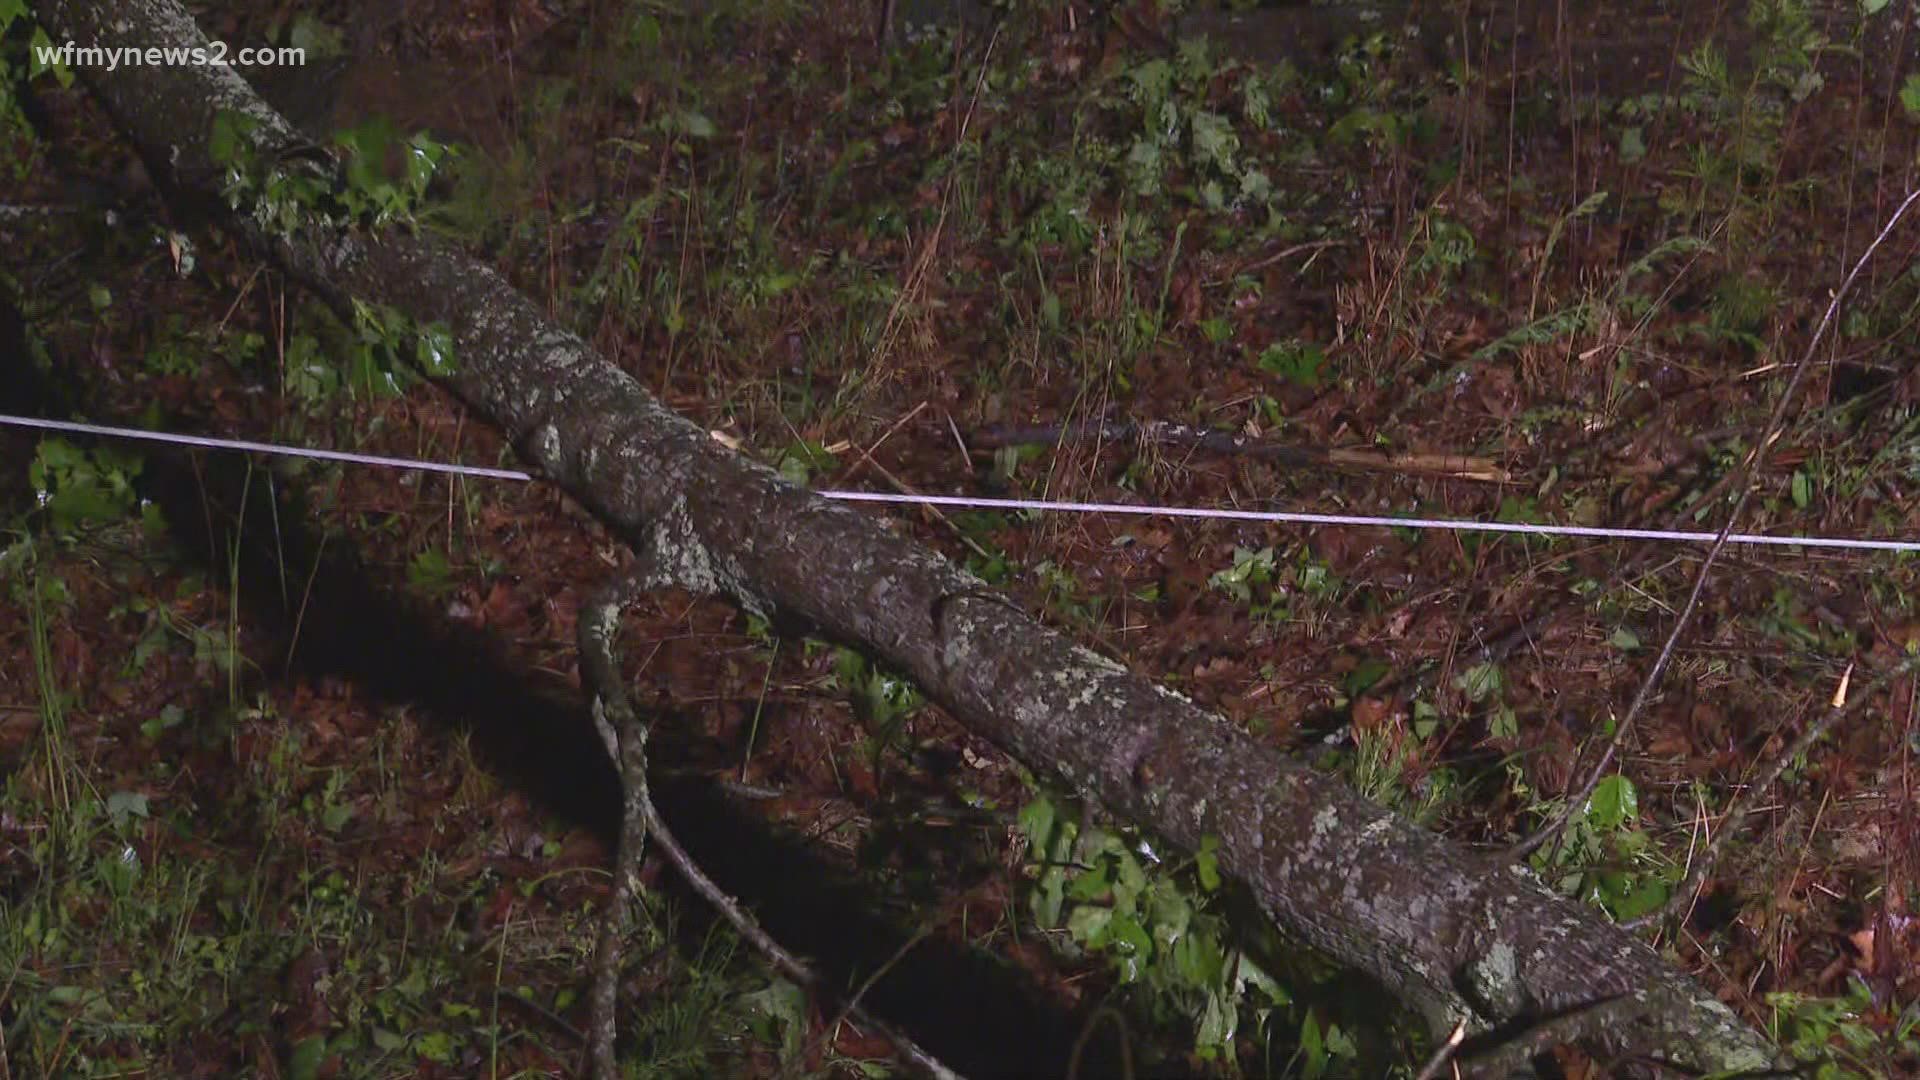 Roads across Rockingham County were inaccessible Friday night due to downed power lines and tree following a severe storm.